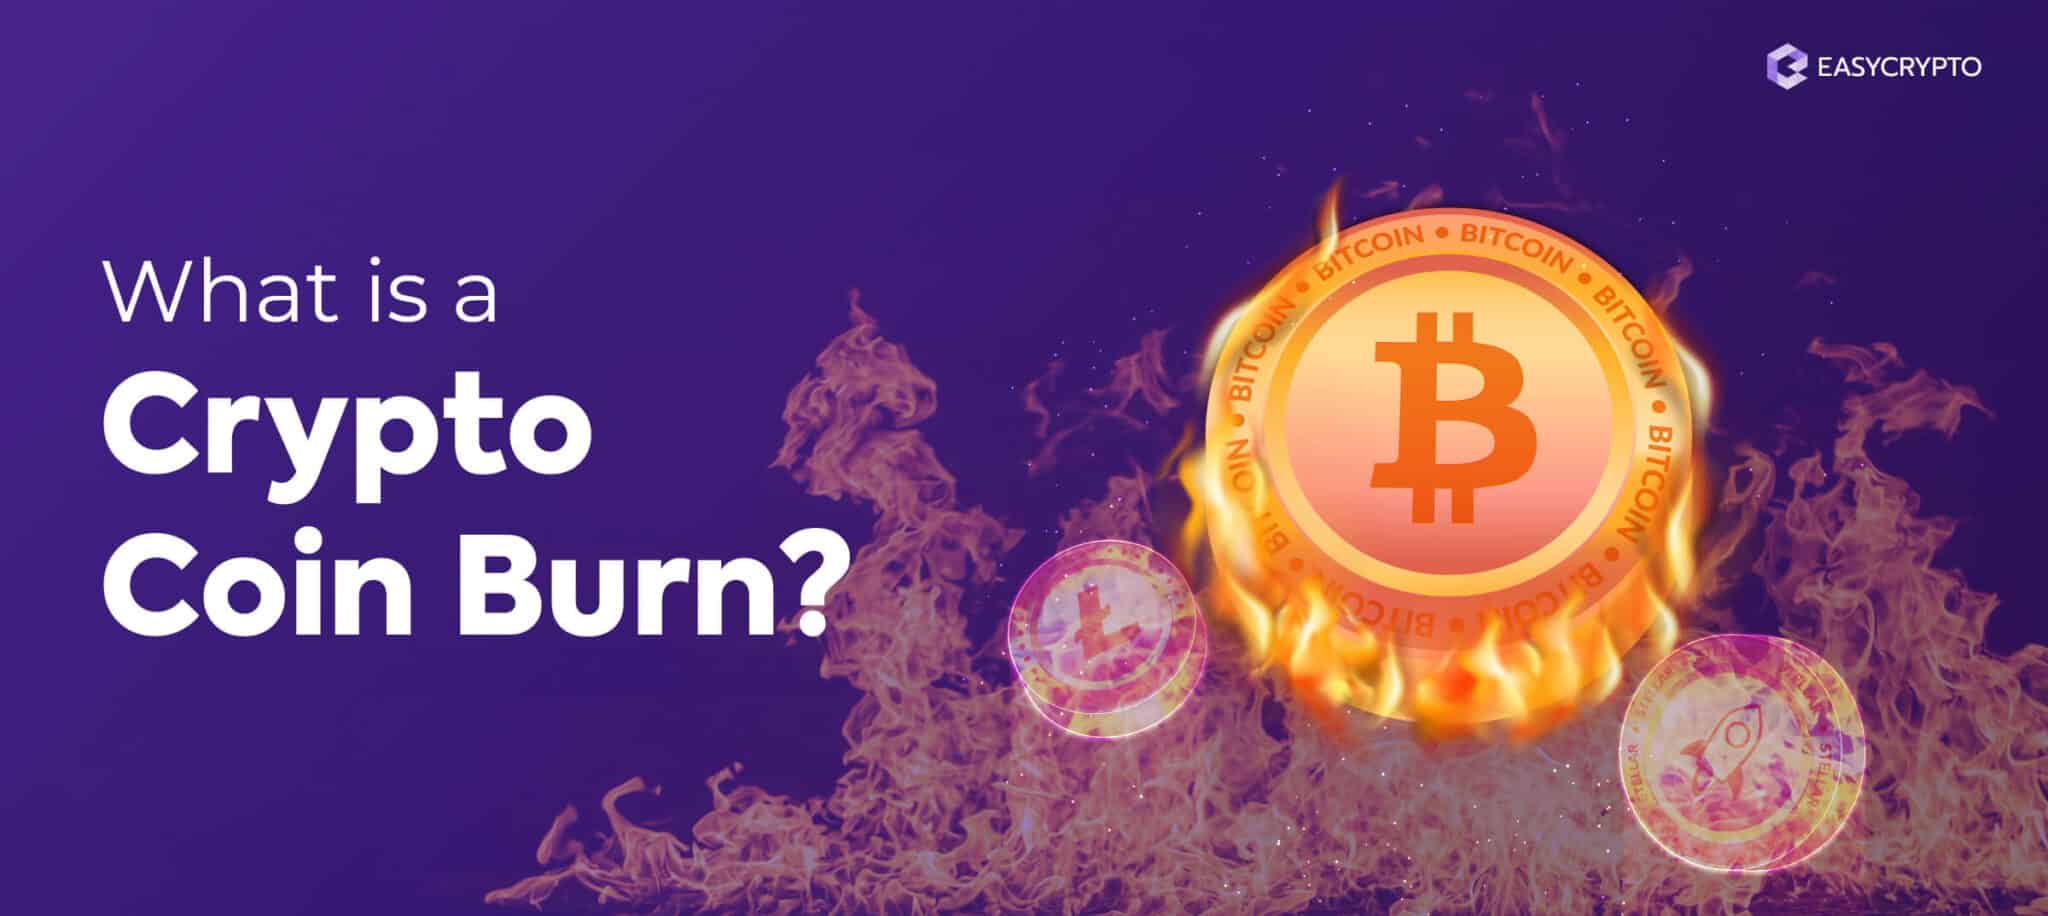 what does it mean to burn crypto coins